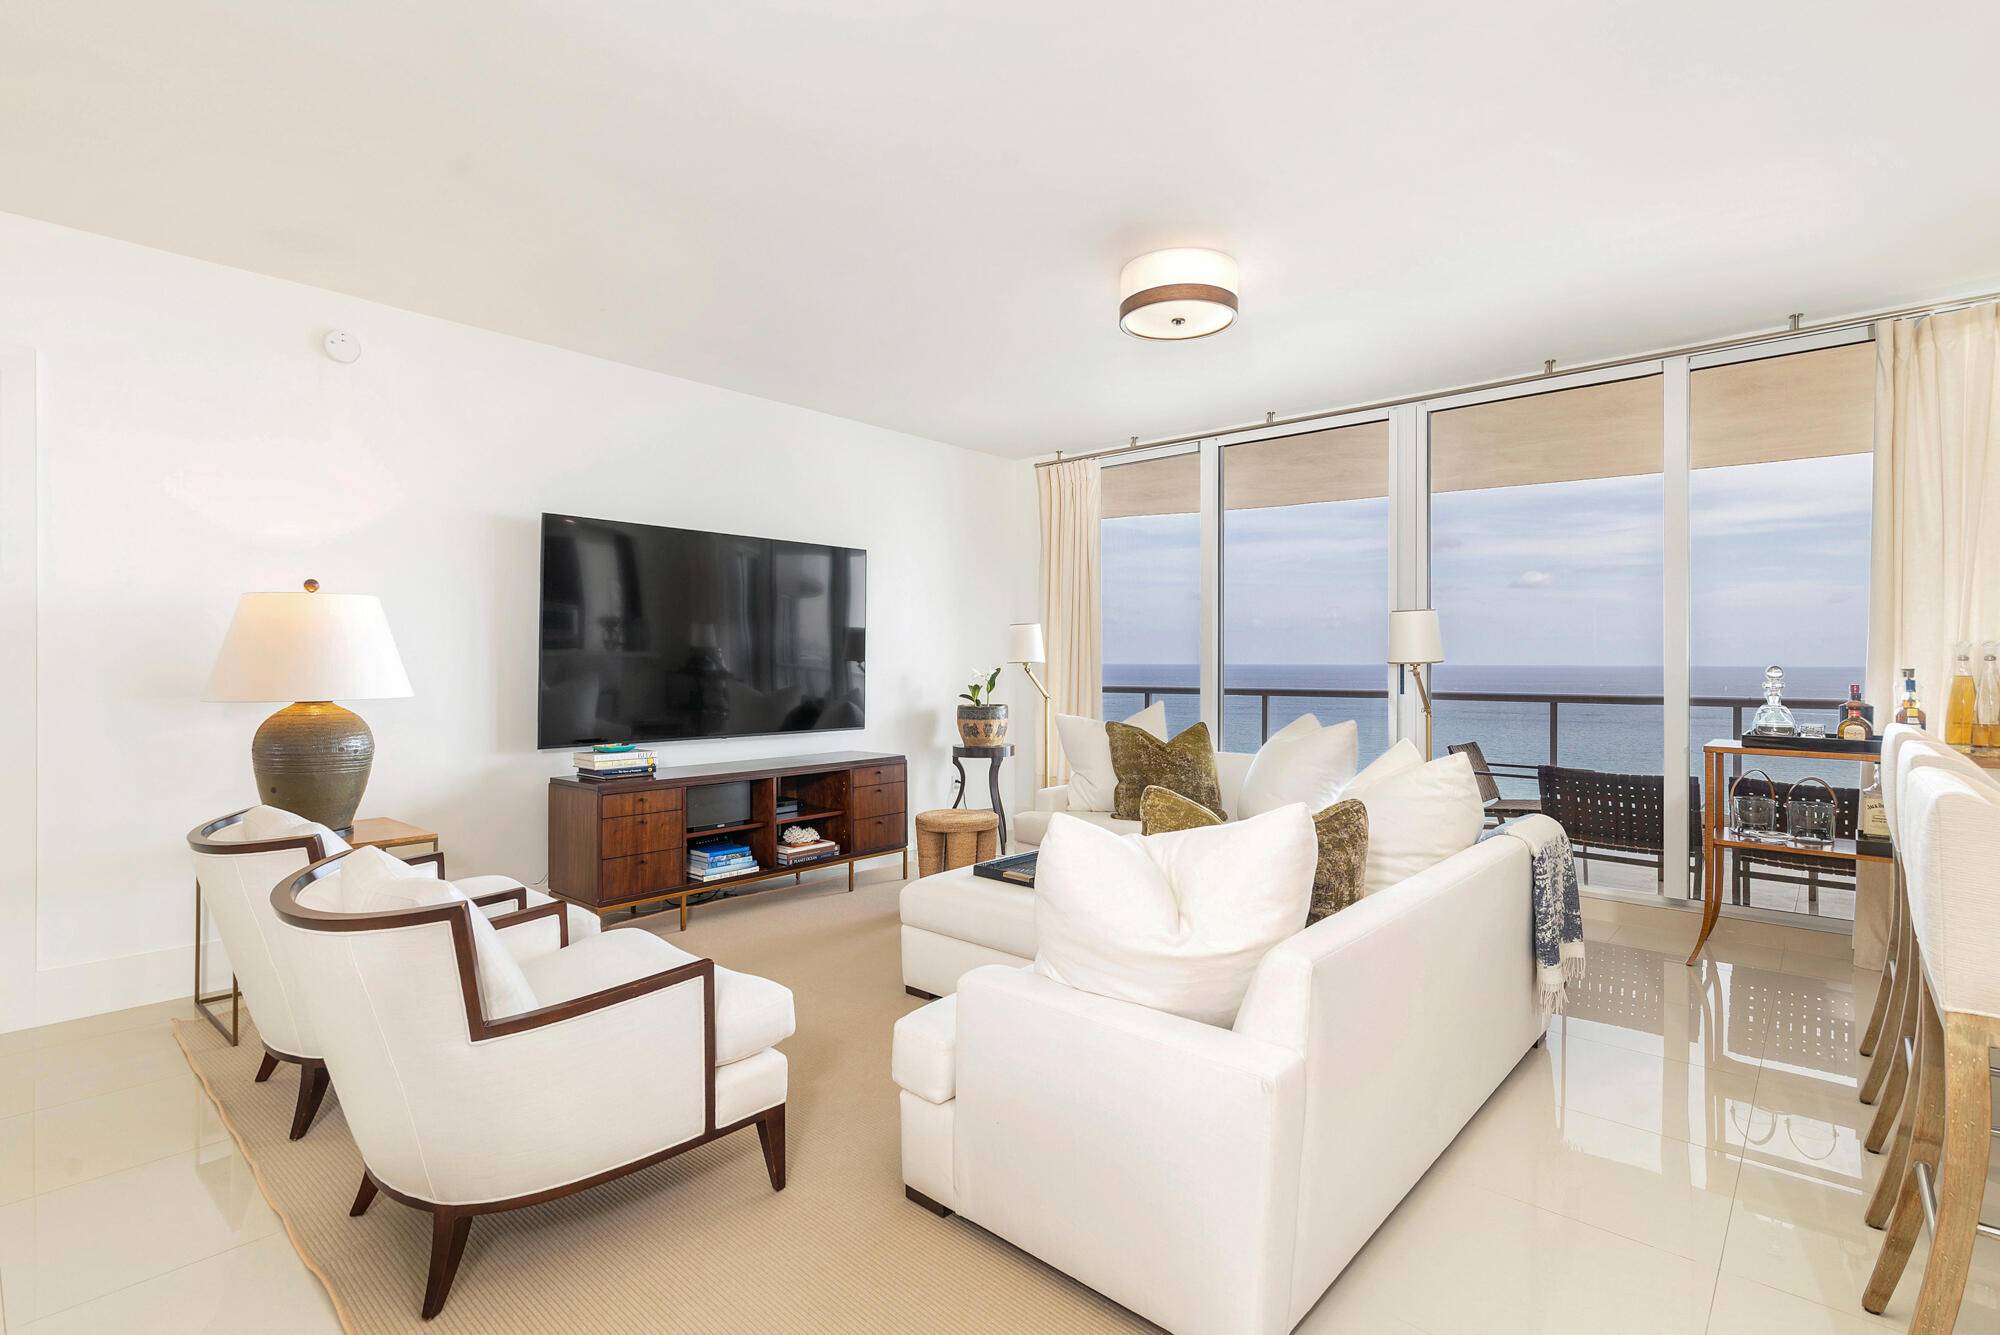 Welcome to the Ritz Carlton Residences Singer Island.